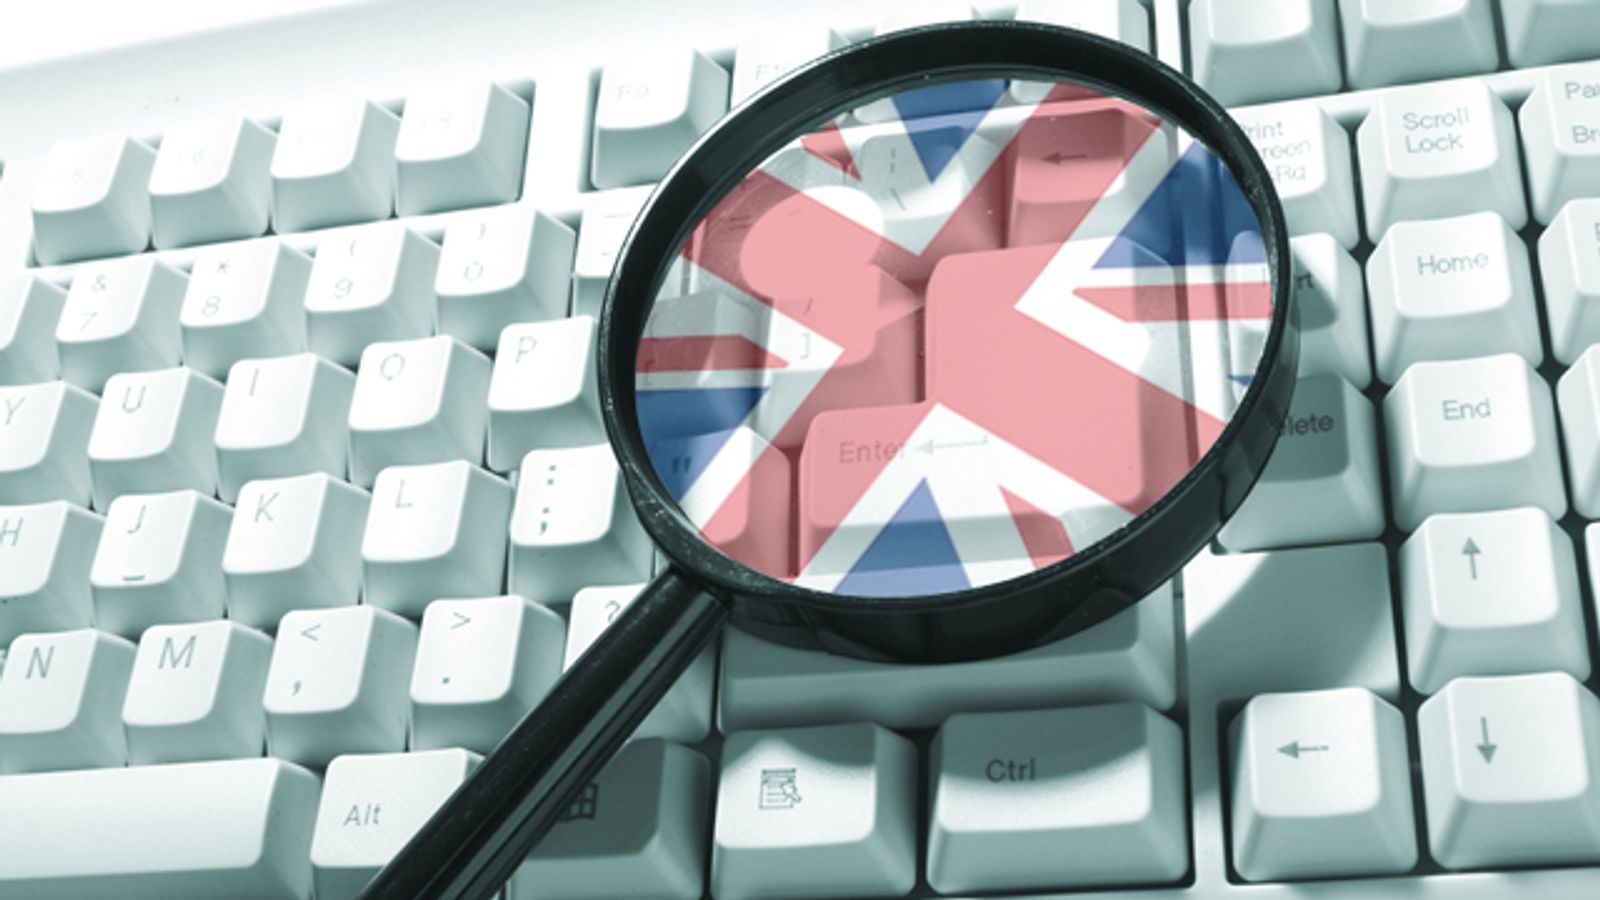 UK Gov. Wants to Monitor All Internet Use